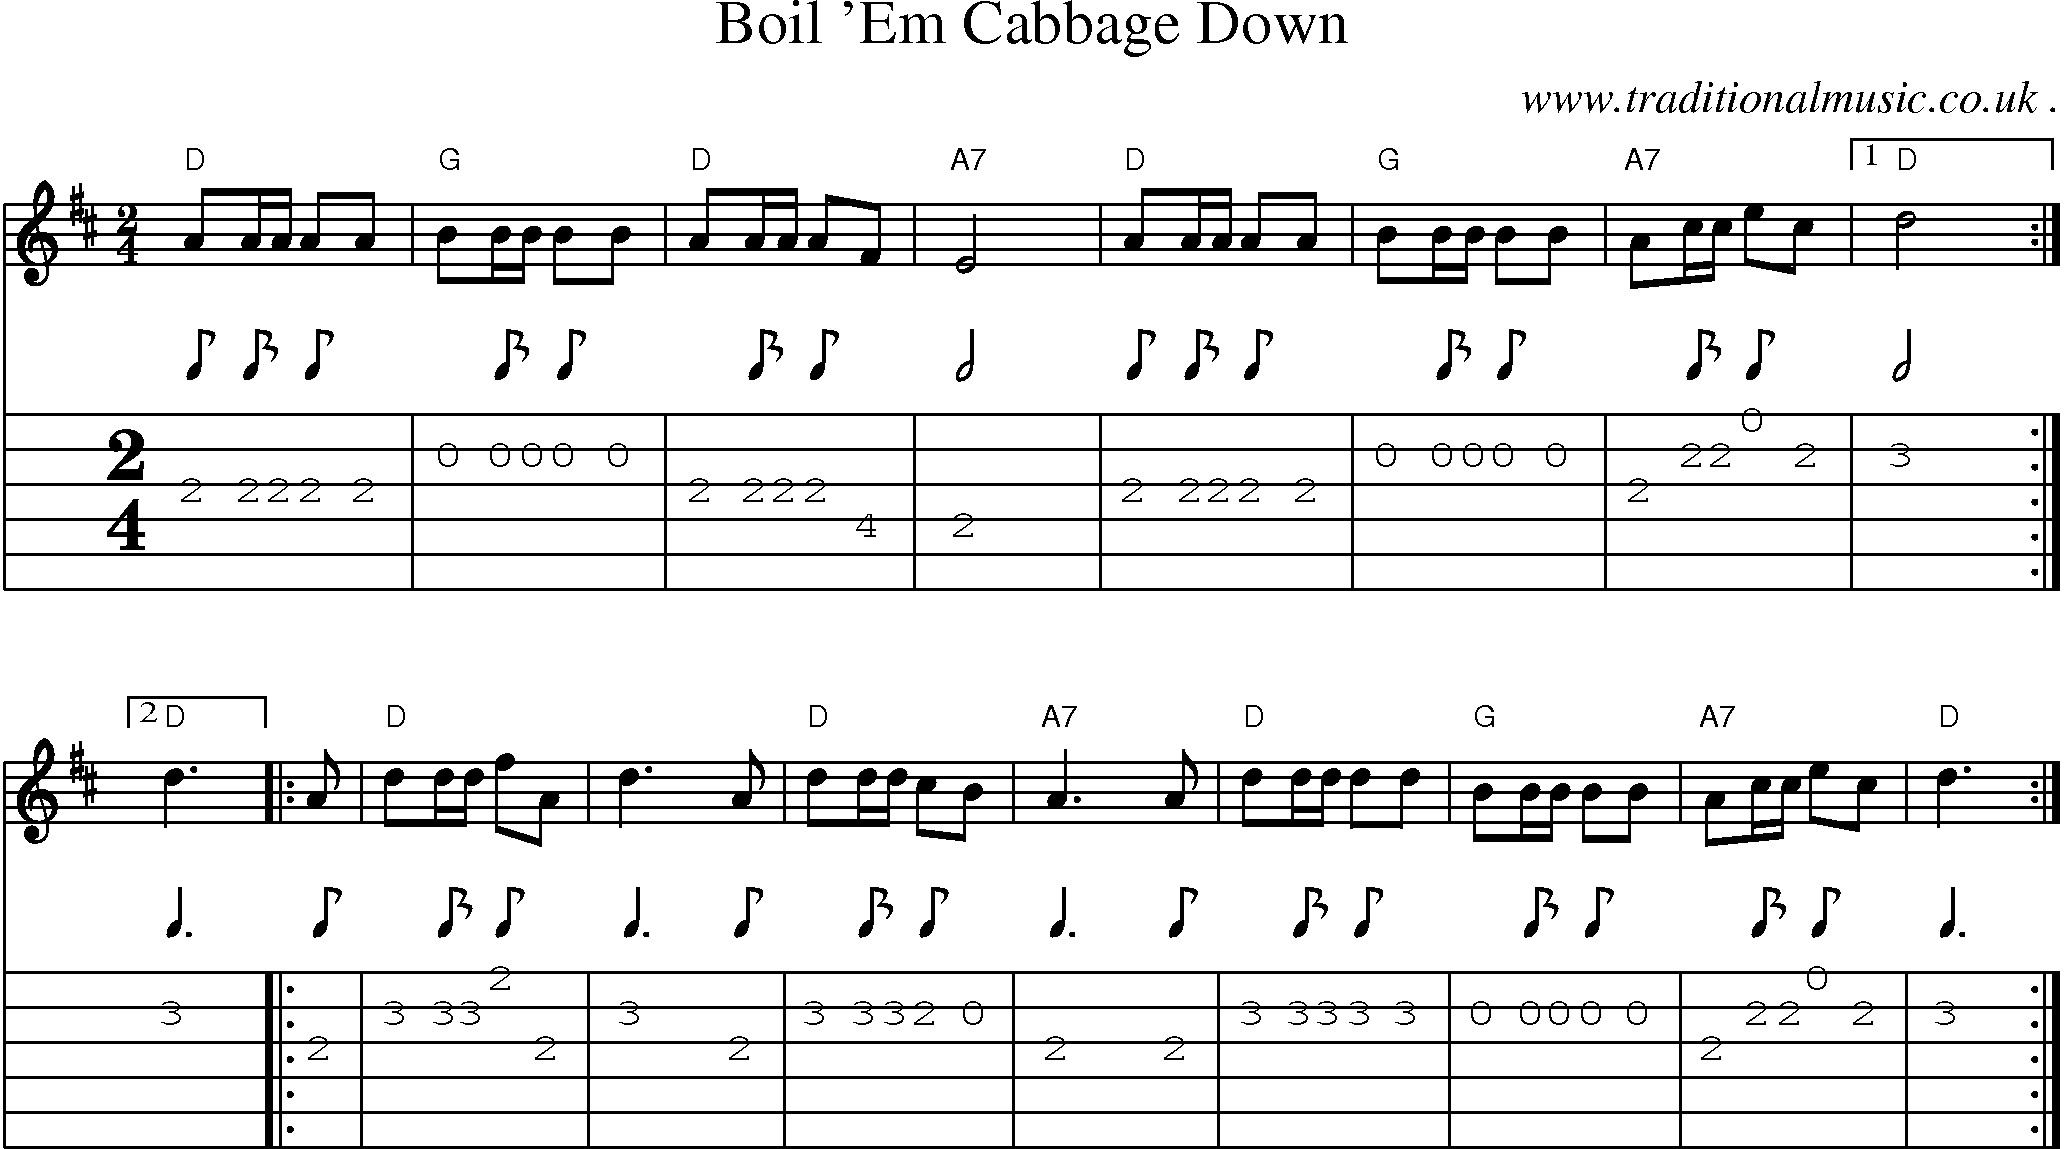 Music Score and Guitar Tabs for Boil em Cabbage Down